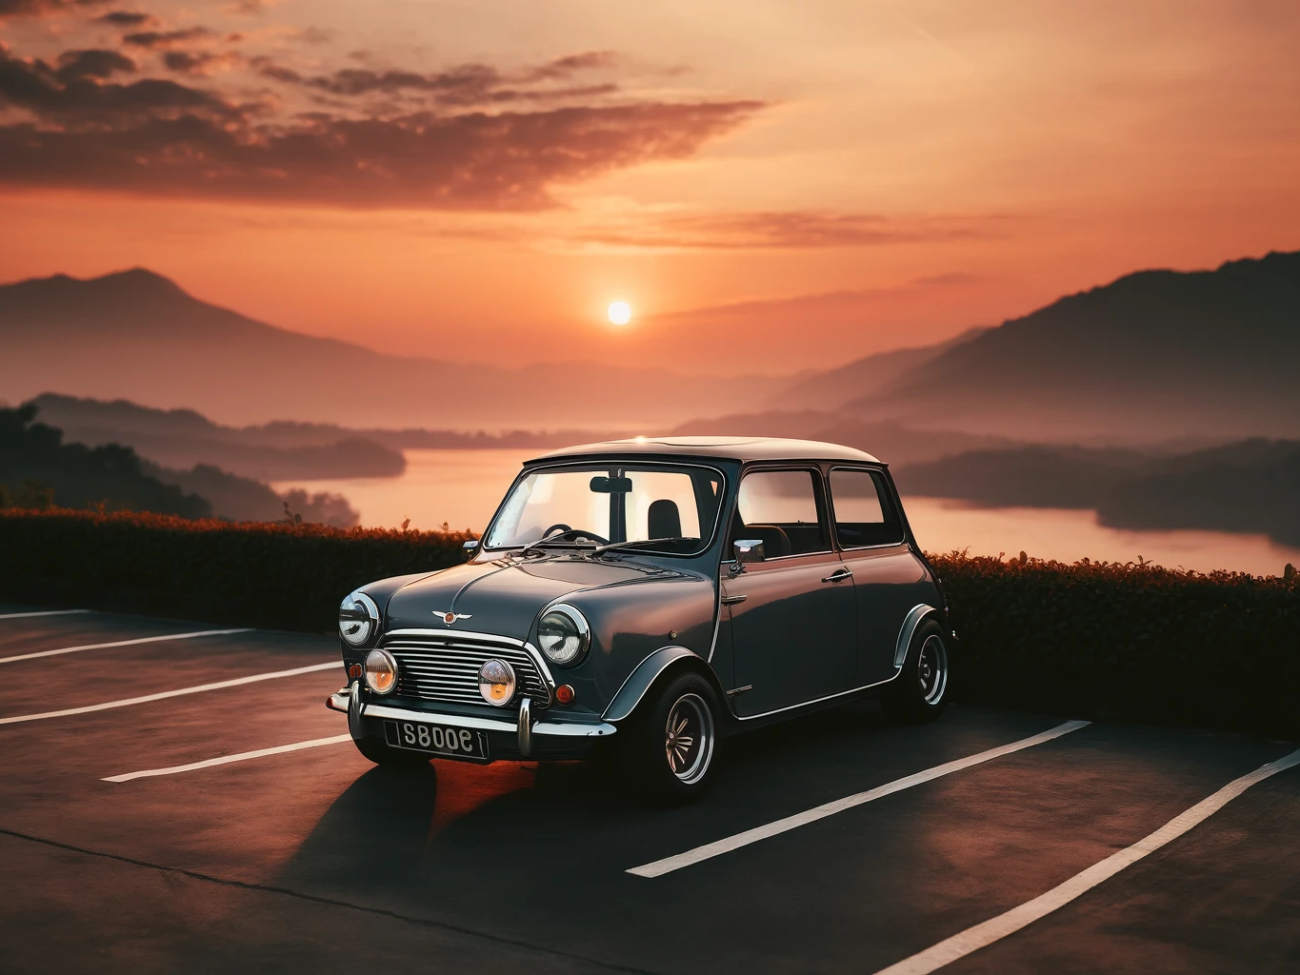 DALL·E 2024-04-05 11.54.14 - Landscape format digital photo capturing a warm and pleasant evening scene, featuring a classic compact car with a design akin to a Mini Cooper, parke